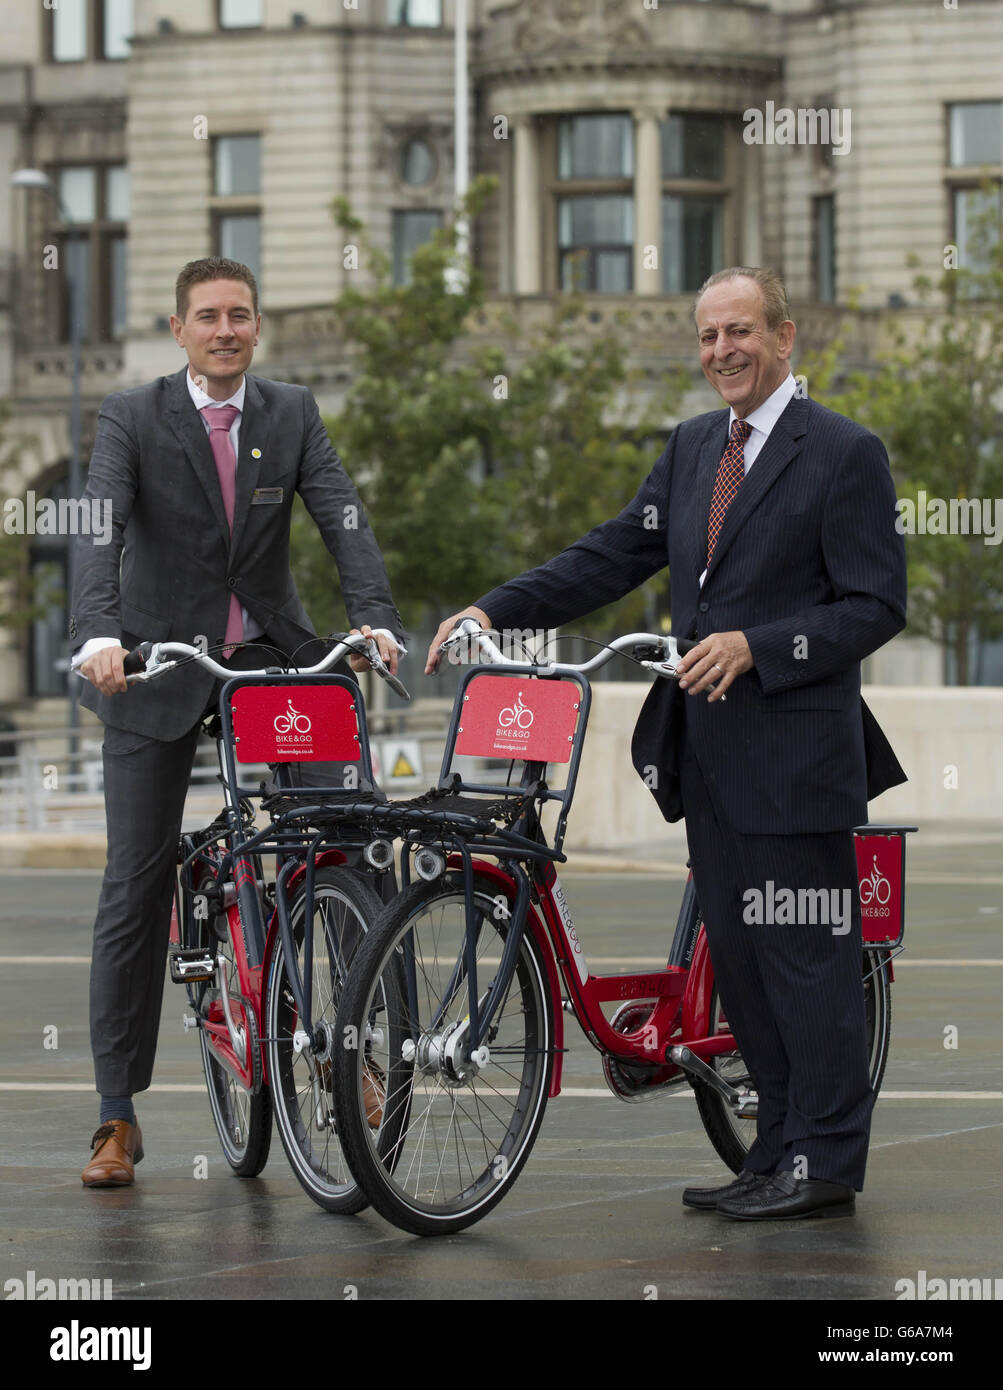 EDITORIAL USE ONLY Kaj Mook, Director of Abellio Bike & Go and Phillip Darnton, Executive Director of the Bicycle Association, Great Britain (right) at the launch of Bike & Go, a nationwide bike hire scheme, at Liverpool Central Station in Liverpool. Stock Photo